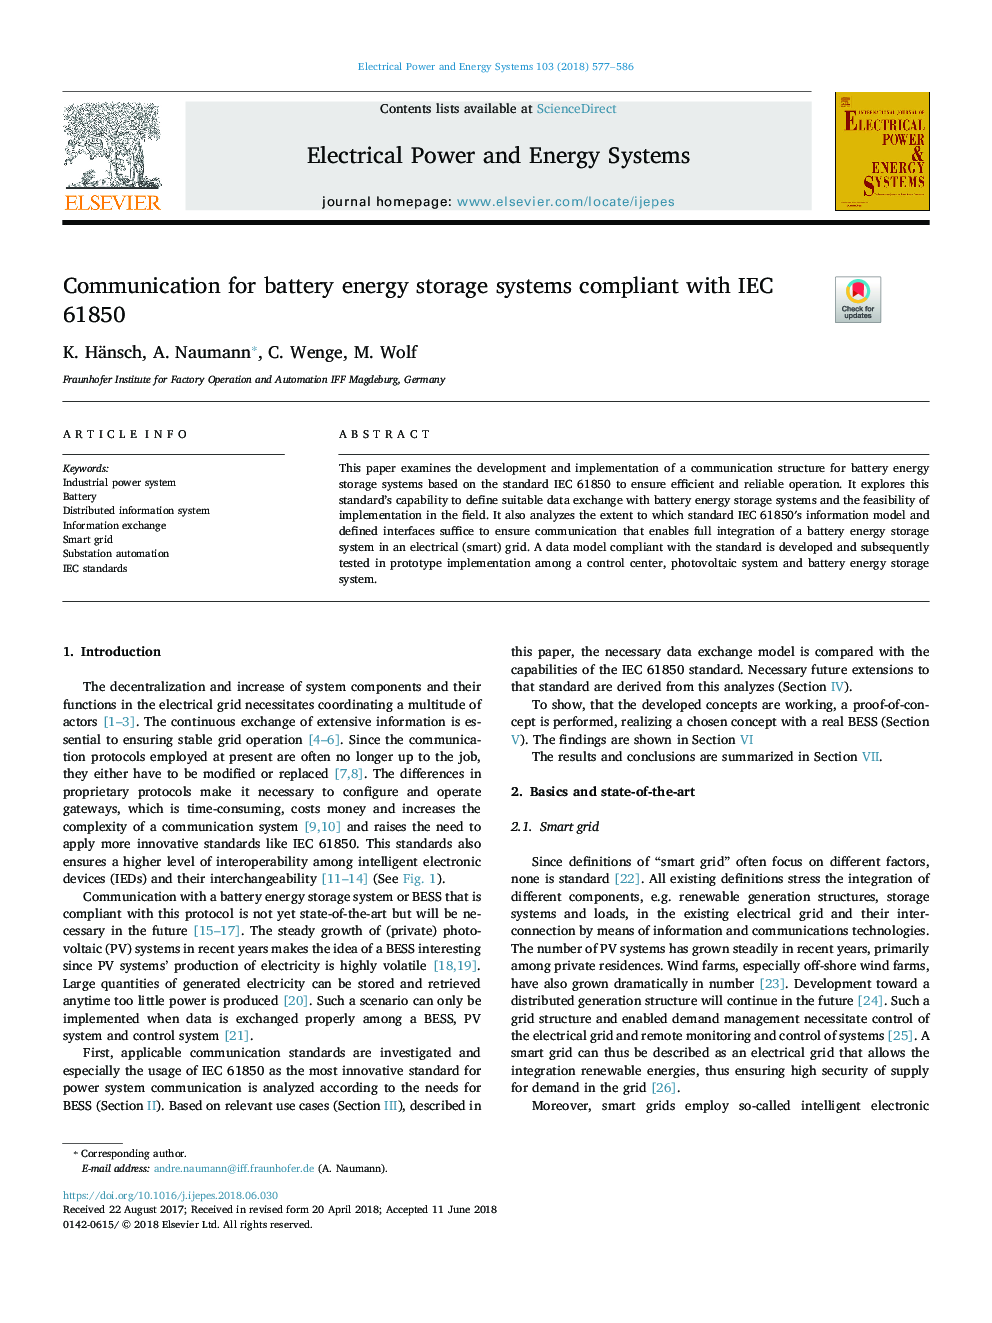 Communication for battery energy storage systems compliant with IEC 61850